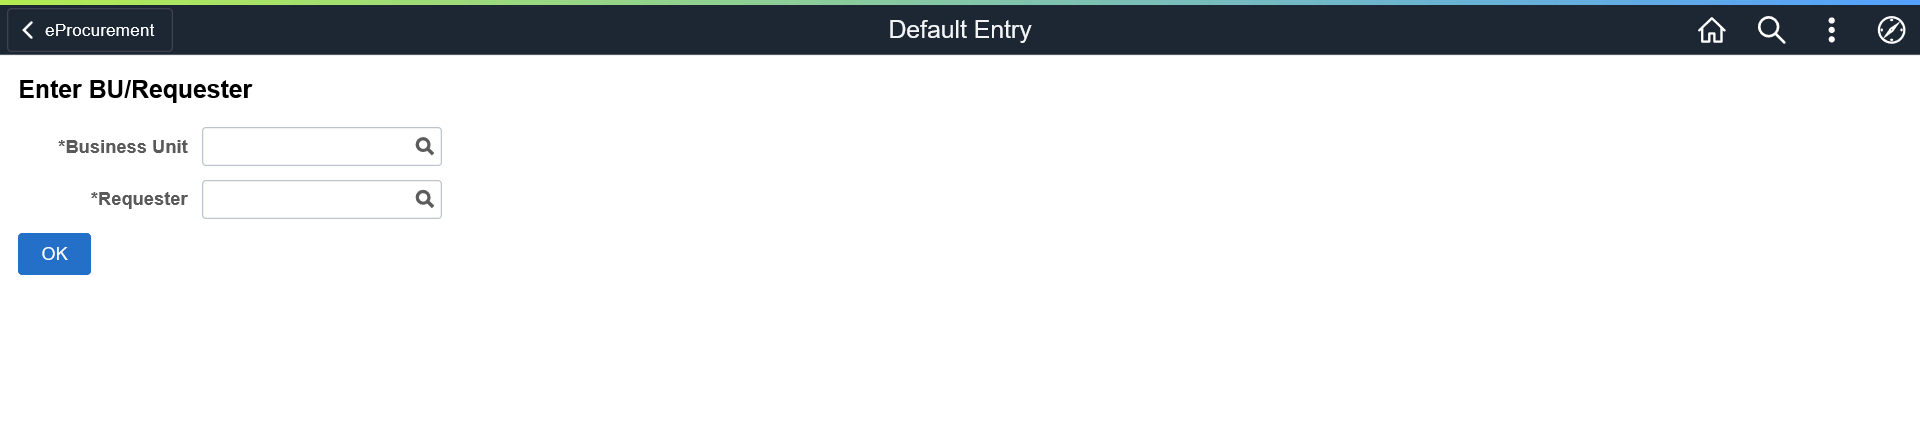 Default Entry page